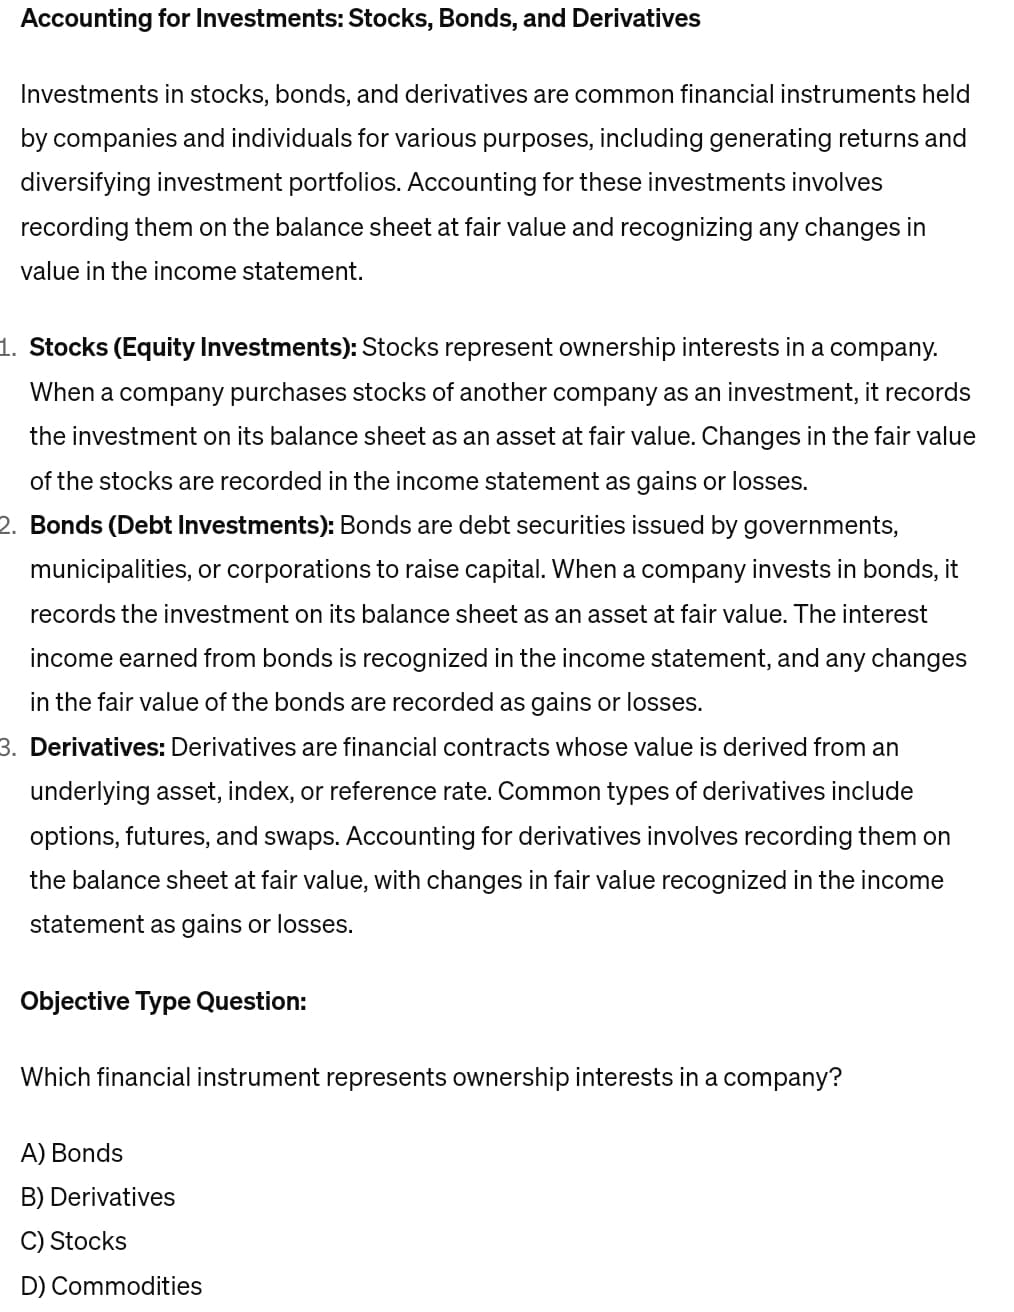 Accounting for Investments: Stocks, Bonds, and Derivatives
Investments in stocks, bonds, and derivatives are common financial instruments held
by companies and individuals for various purposes, including generating returns and
diversifying investment portfolios. Accounting for these investments involves
recording them on the balance sheet at fair value and recognizing any changes in
value in the income statement.
1. Stocks (Equity Investments): Stocks represent ownership interests in a company.
When a company purchases stocks of another company as an investment, it records
the investment on its balance sheet as an asset at fair value. Changes in the fair value
of the stocks are recorded in the income statement as gains or losses.
2. Bonds (Debt Investments): Bonds are debt securities issued by governments,
municipalities, or corporations to raise capital. When a company invests in bonds, it
records the investment on its balance sheet as an asset at fair value. The interest
income earned from bonds is recognized in the income statement, and any changes
in the fair value of the bonds are recorded as gains or losses.
3. Derivatives: Derivatives are financial contracts whose value is derived from an
underlying asset, index, or reference rate. Common types of derivatives include
options, futures, and swaps. Accounting for derivatives involves recording them on
the balance sheet at fair value, with changes in fair value recognized in the income
statement as gains or losses.
Objective Type Question:
Which financial instrument represents ownership interests in a company?
A) Bonds
B) Derivatives
C) Stocks
D) Commodities